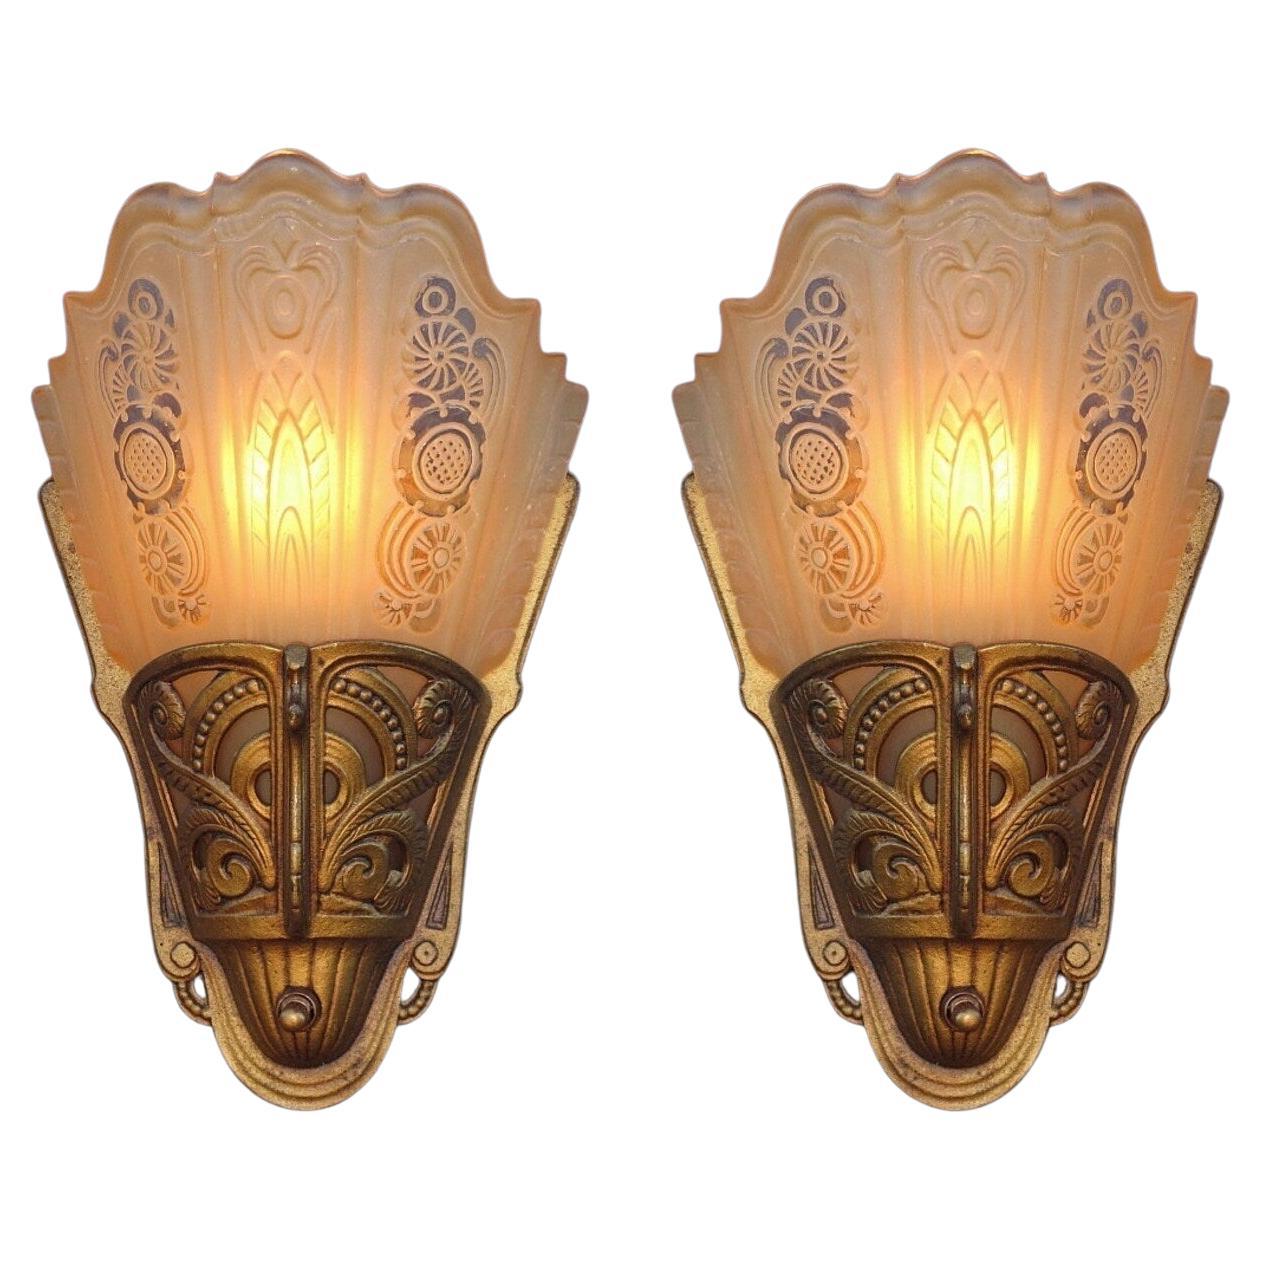 3 Pair Vintage Restored Regal Sconces with Consolidated Shades priced per pair